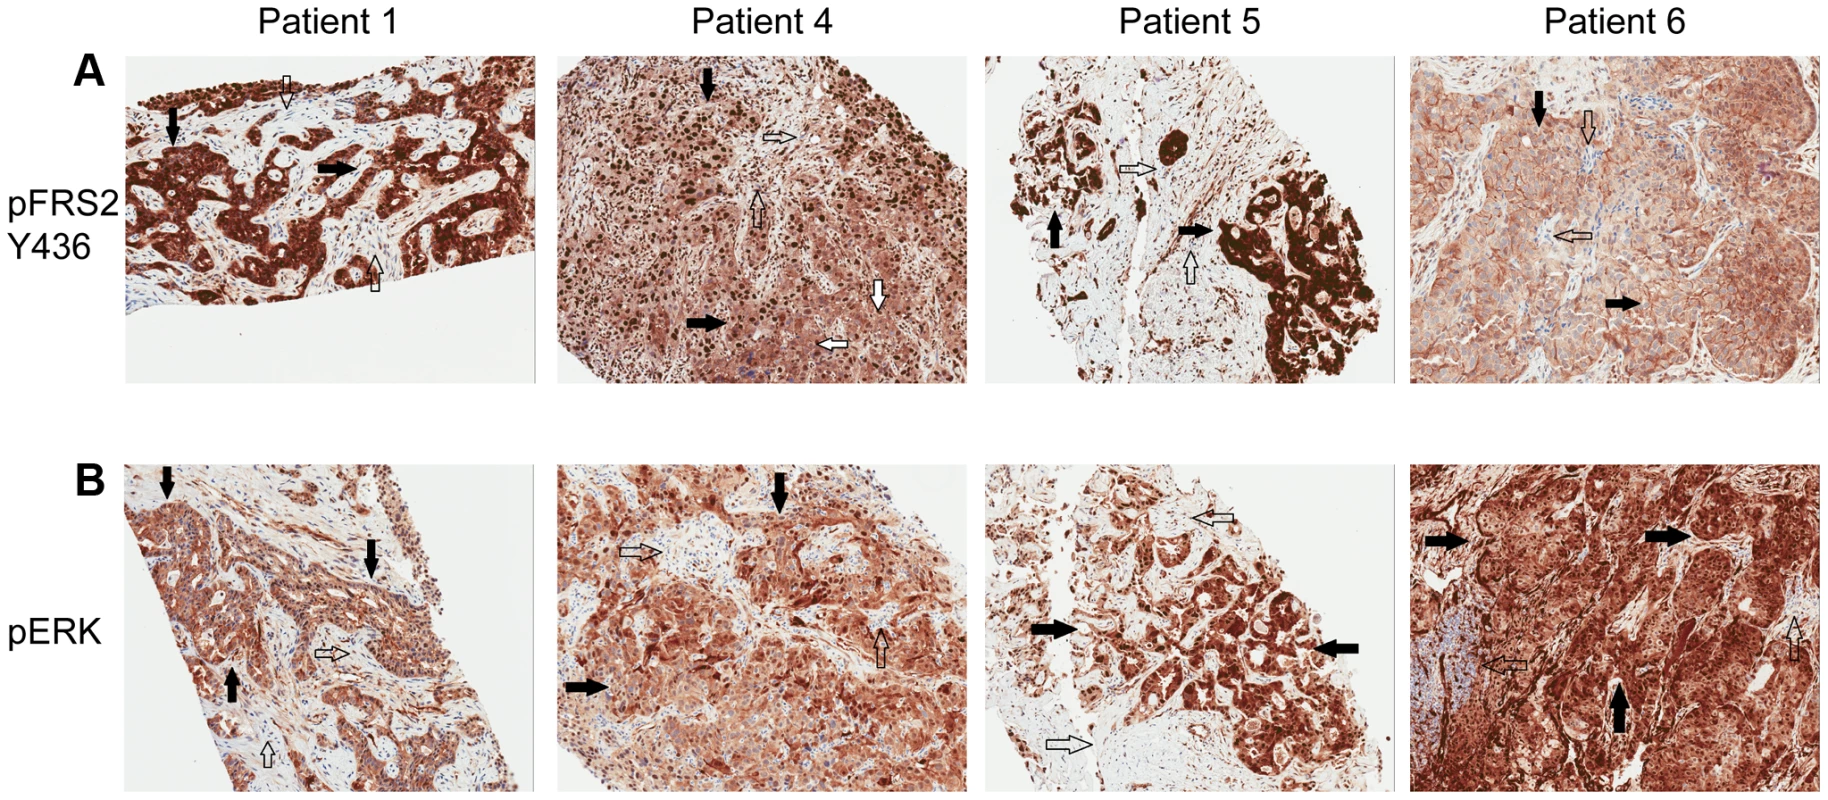 Immunohistochemistry demonstrating pFRS2 Y436, and pERK expression in Patients 1, 4, 5 and 6.